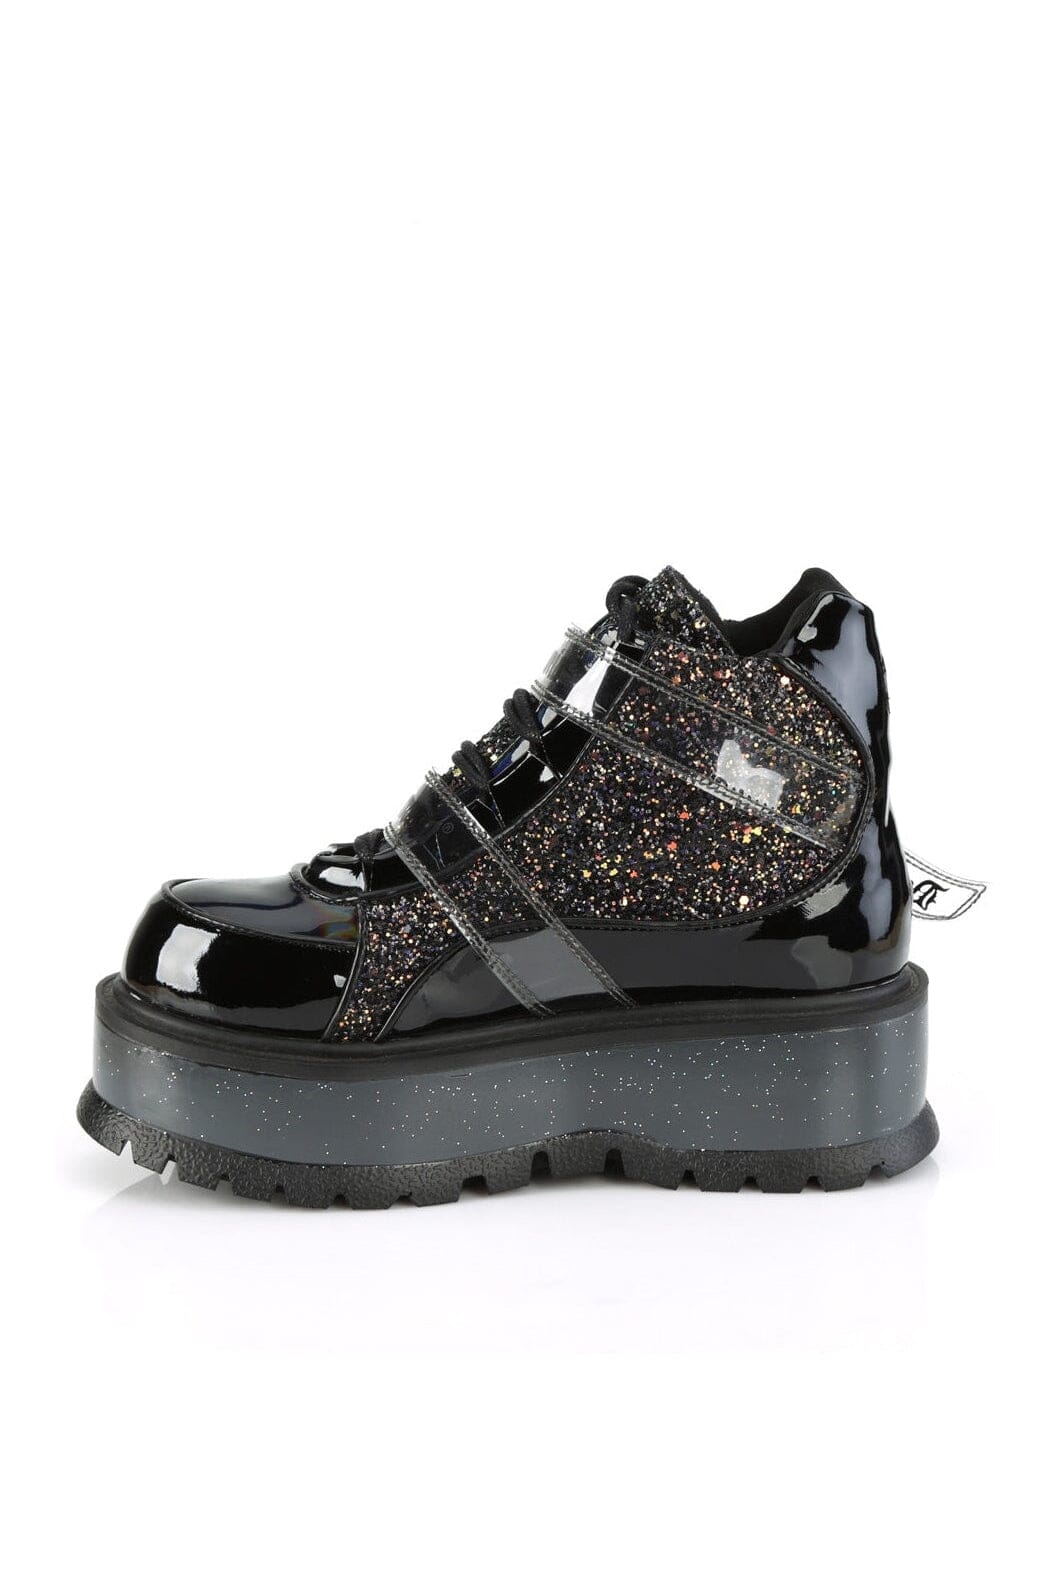 SLACKER-50 Black Glitter Ankle Boot-Ankle Boots-Demonia-SEXYSHOES.COM